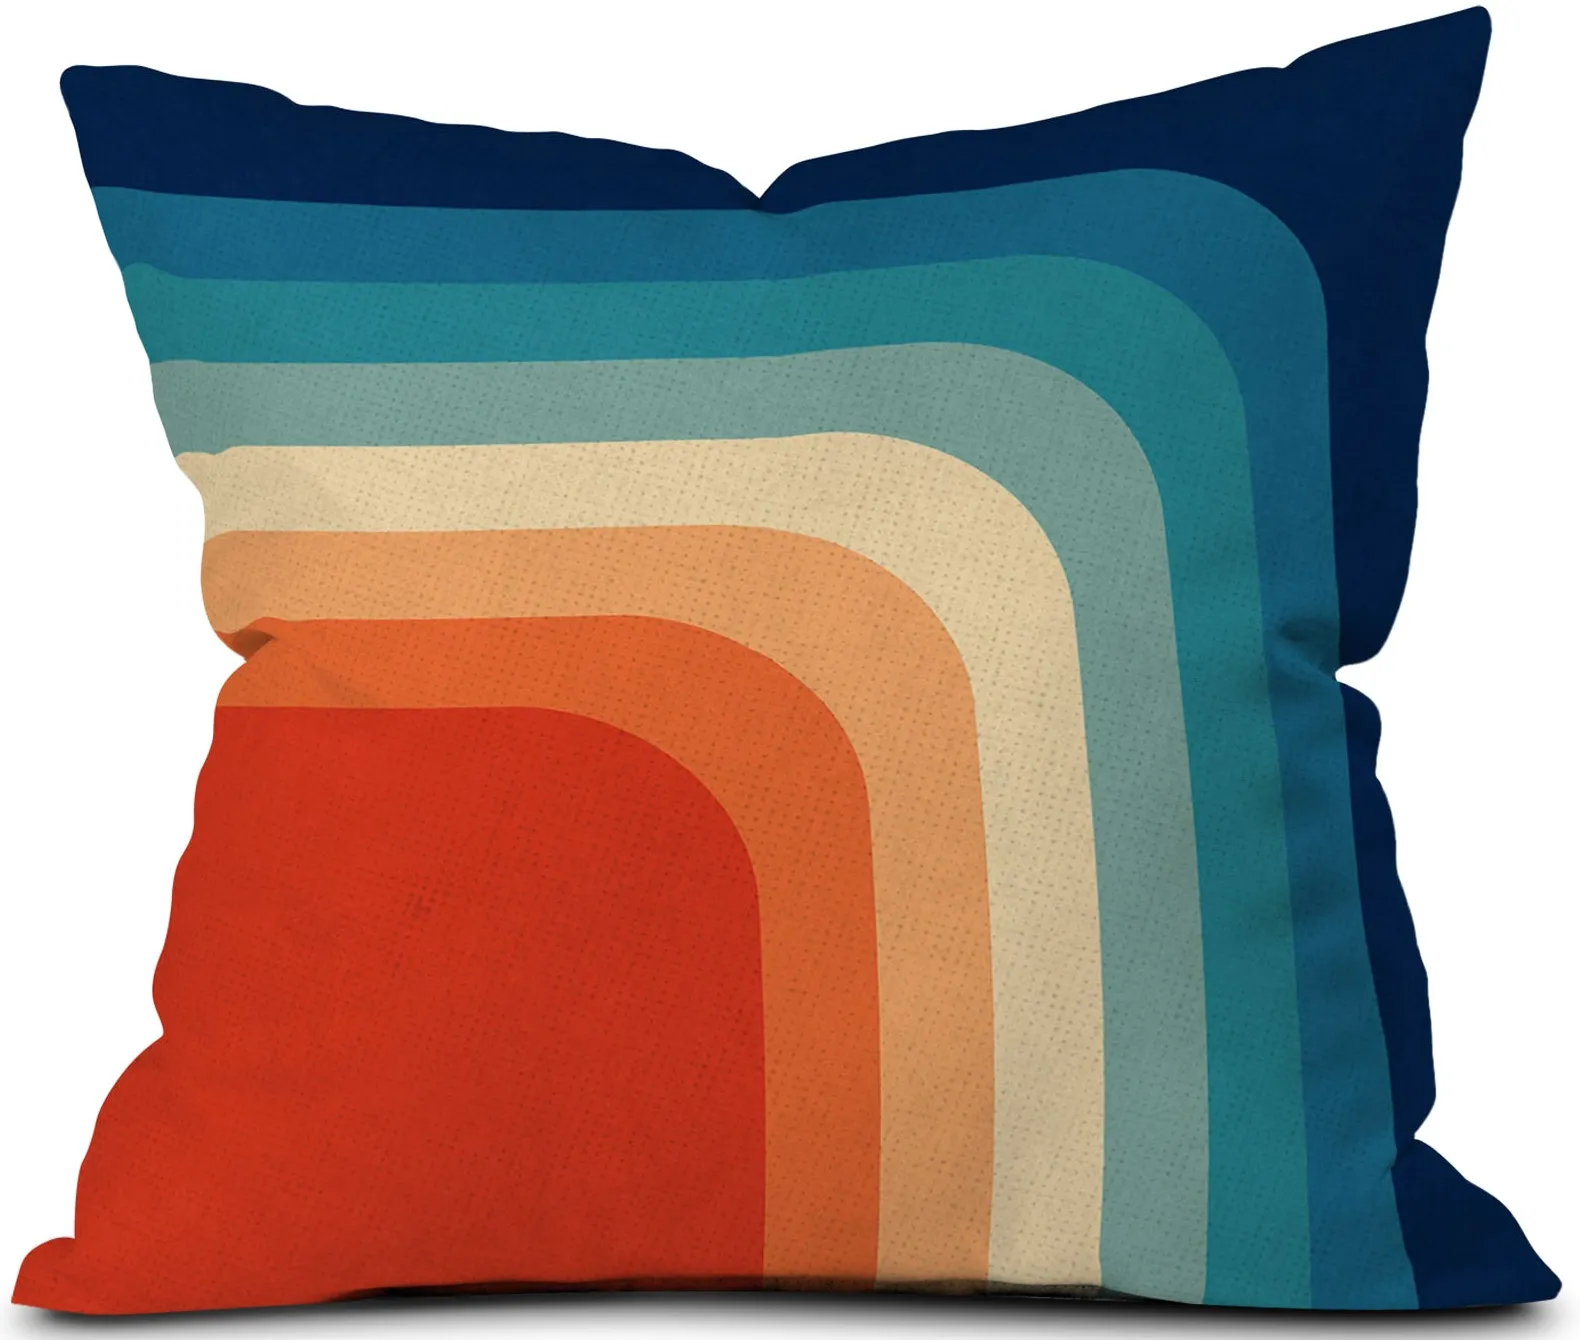 Retro 70s Color Palette Toss Pillow by Alisa Galitsyna